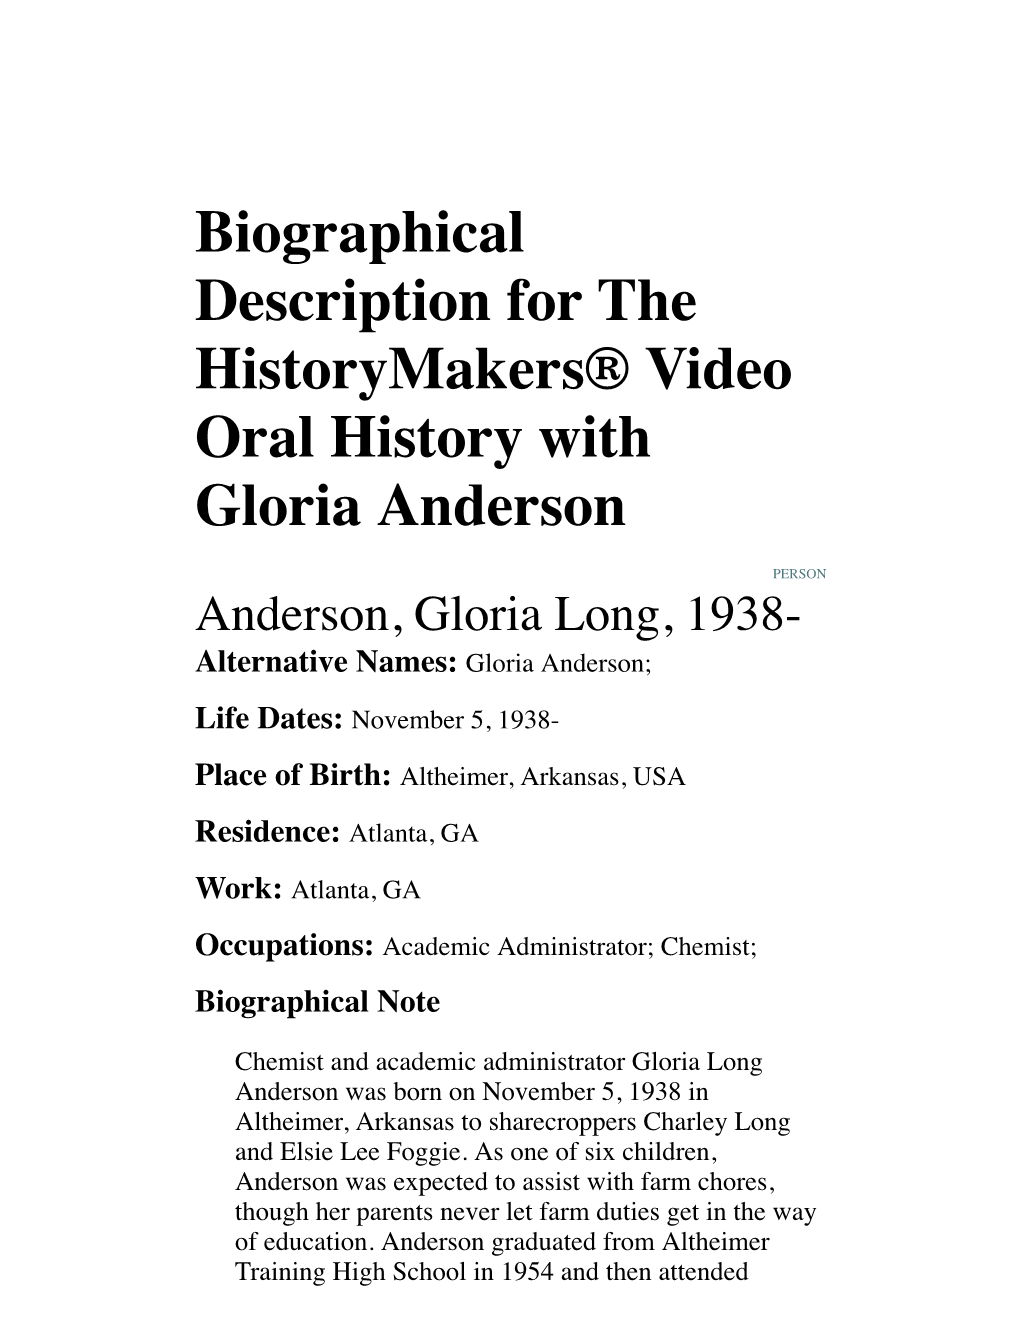 Biographical Description for the Historymakers® Video Oral History with Gloria Anderson